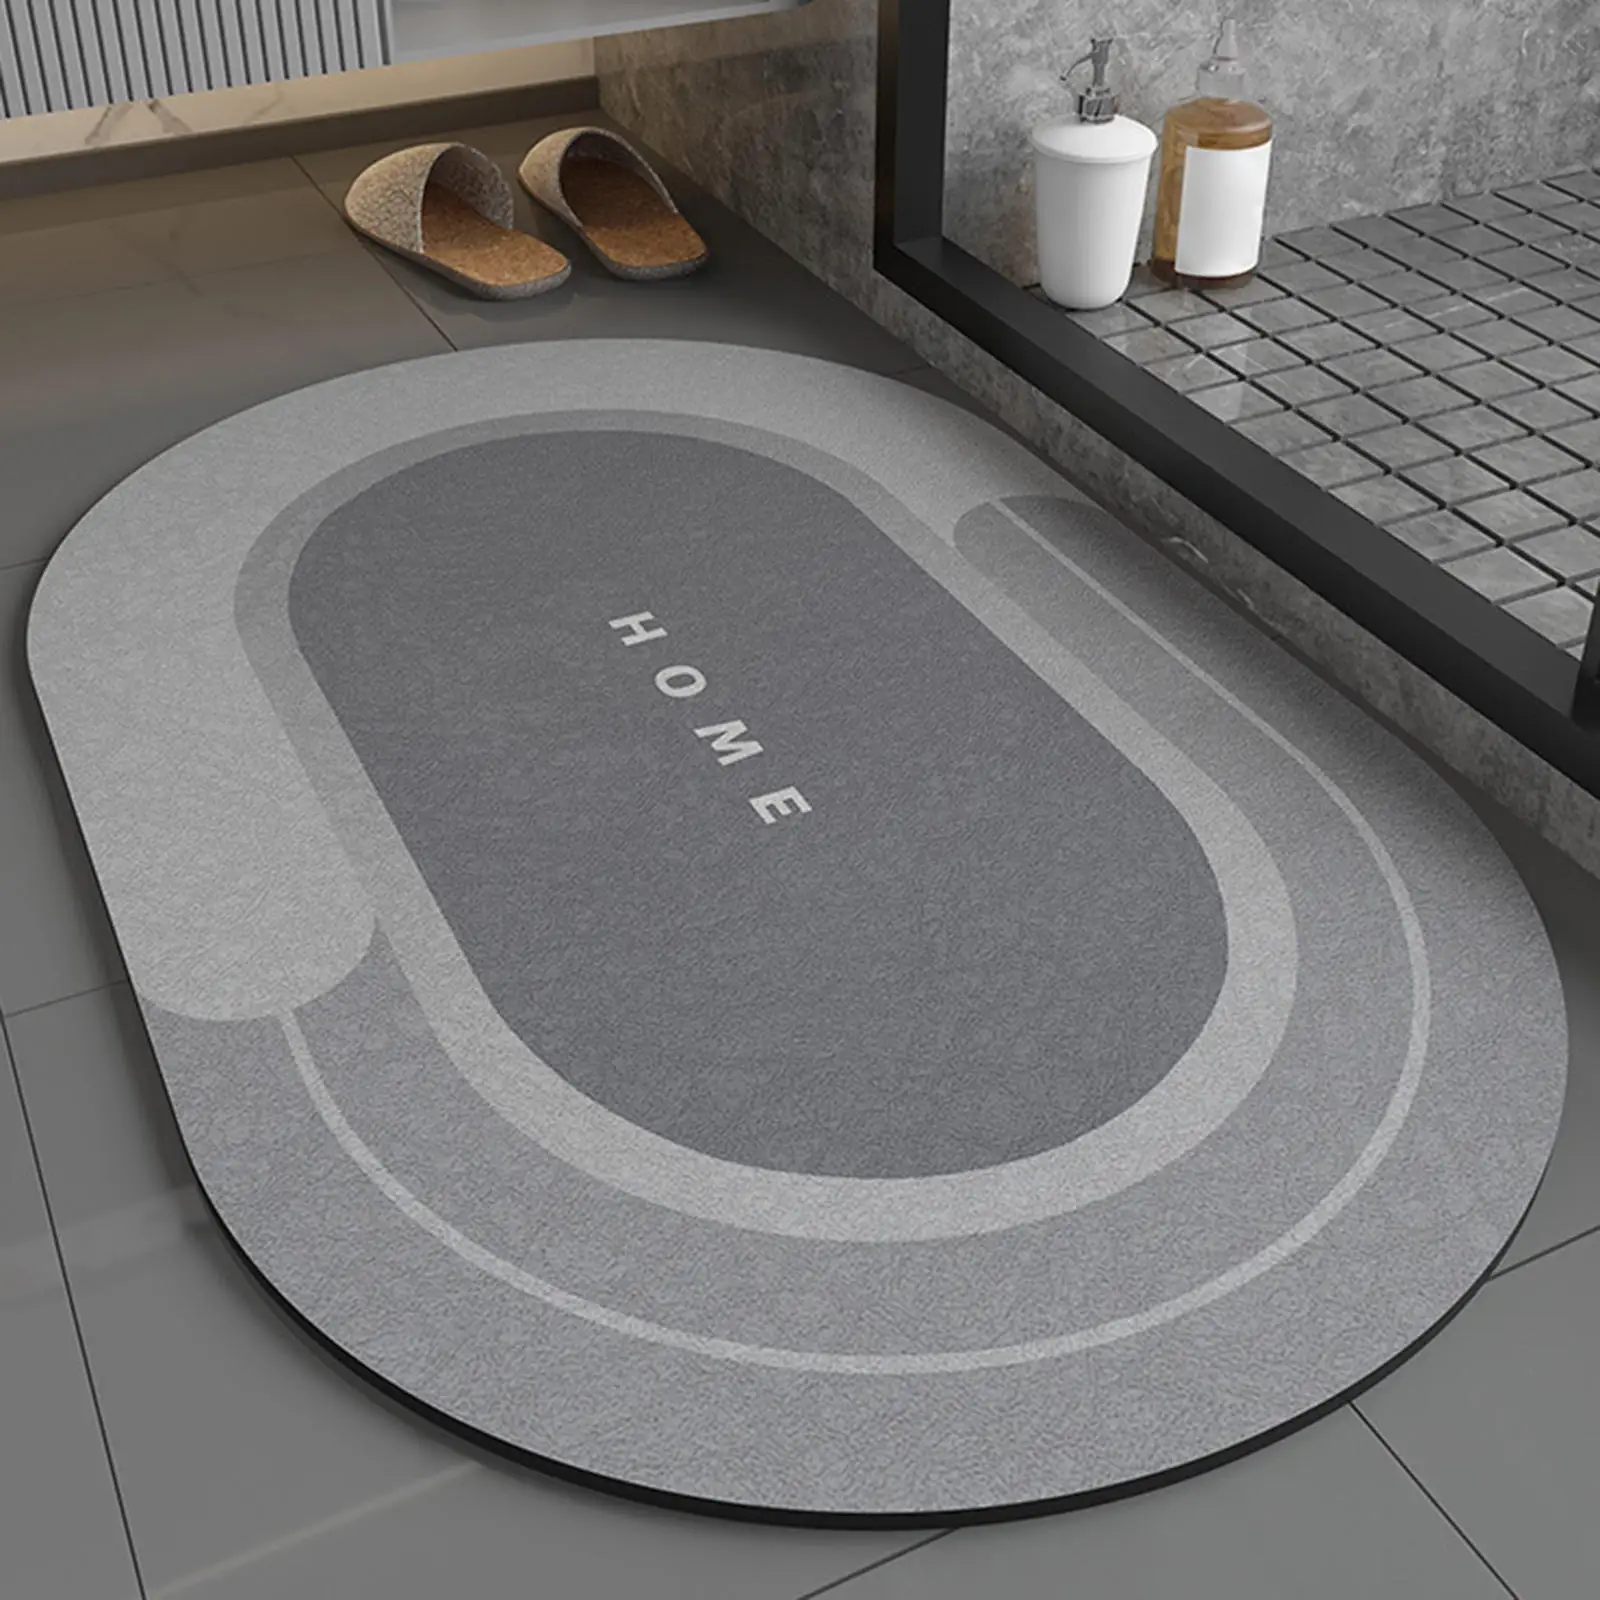 Bath Mat Oilproof Washable Super Cozy Rubber Backing Super Absorbent Bathroom Carpet for Toilet